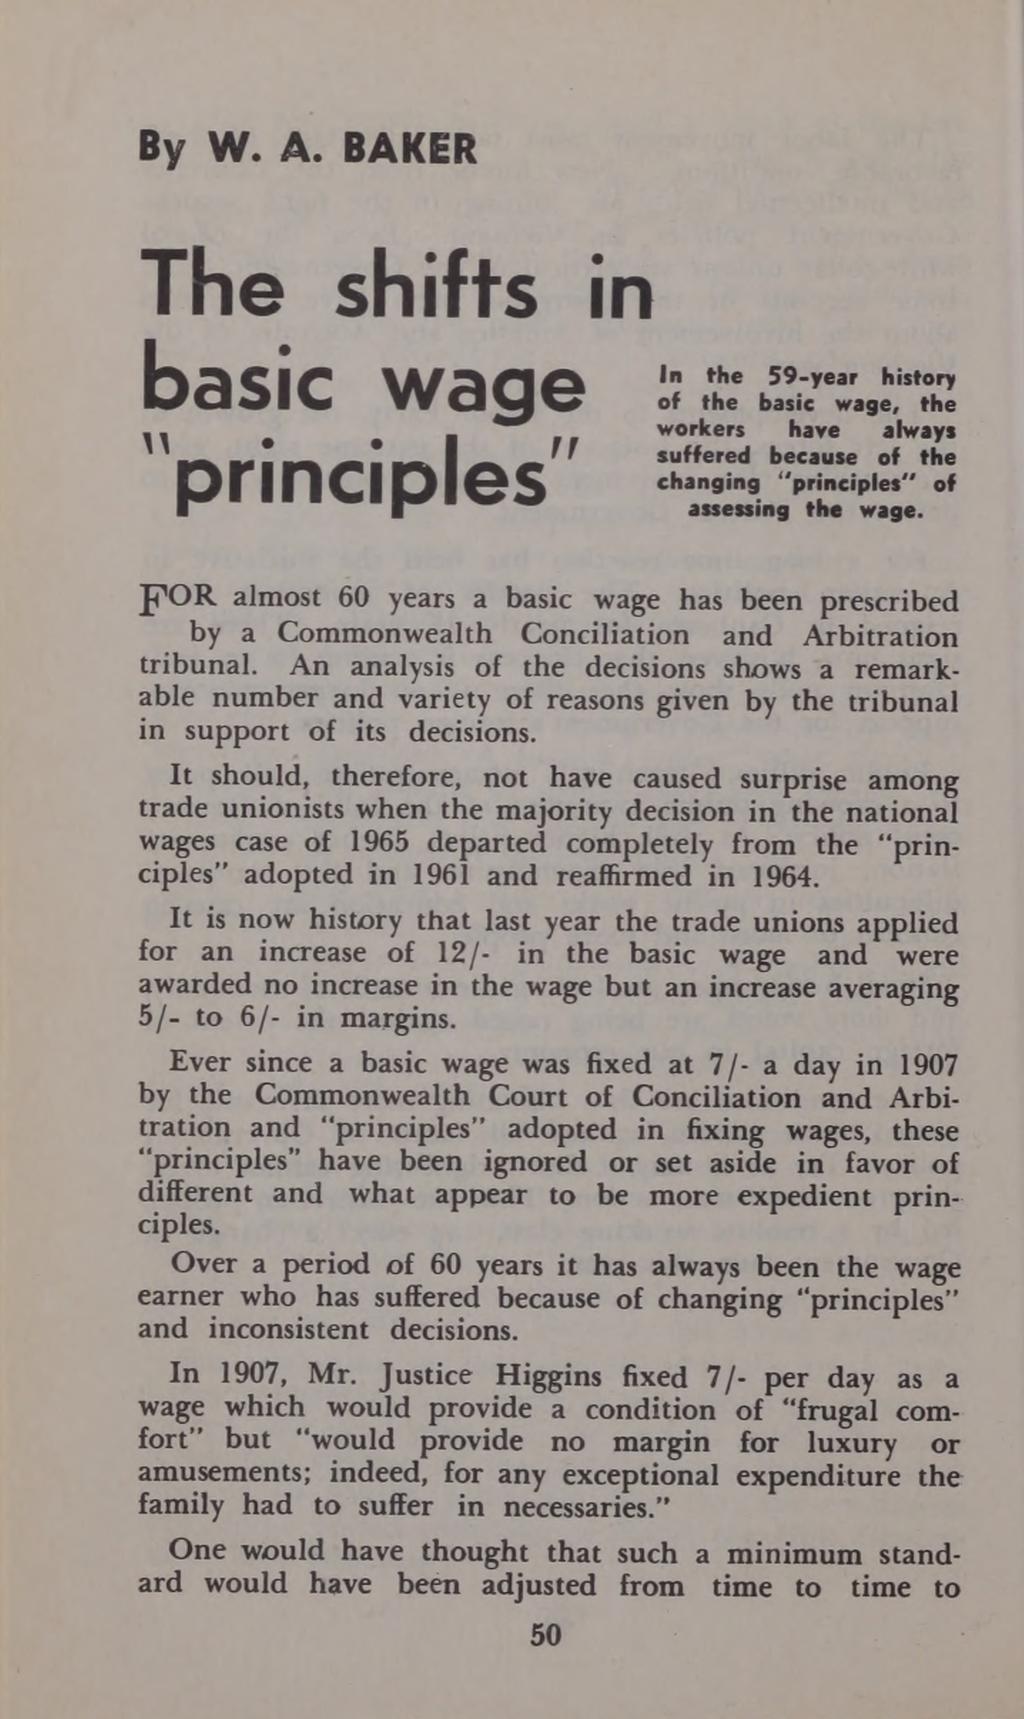 By W. A. BAKER The shifts in basic wage "principles" In the 59-year history of the basic wage, the workers hare always suffered because of the changing 'principles" of assessing the wage.